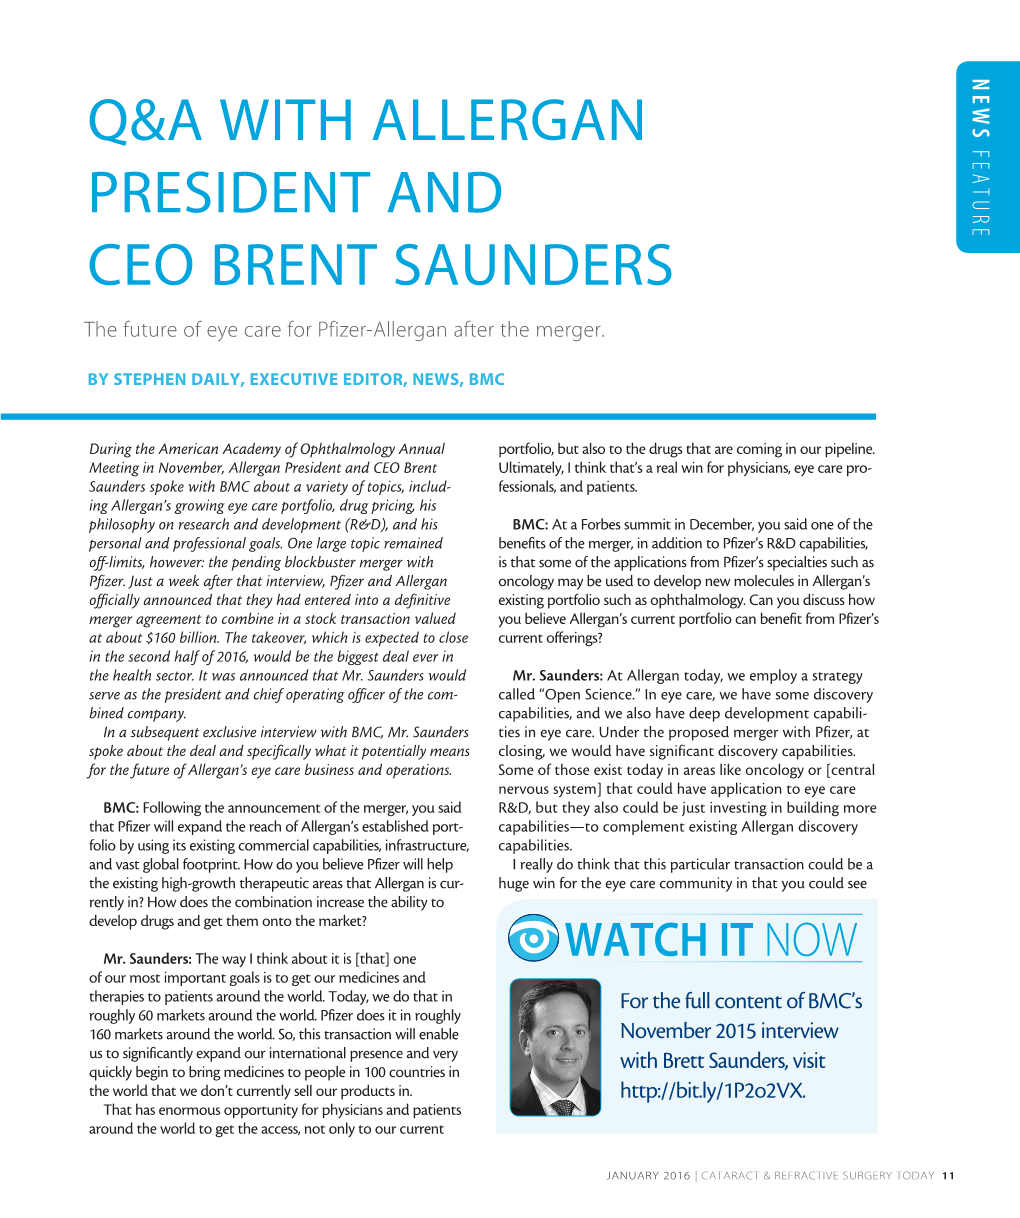 Q&A with Allergan President and Ceo Brent Saunders